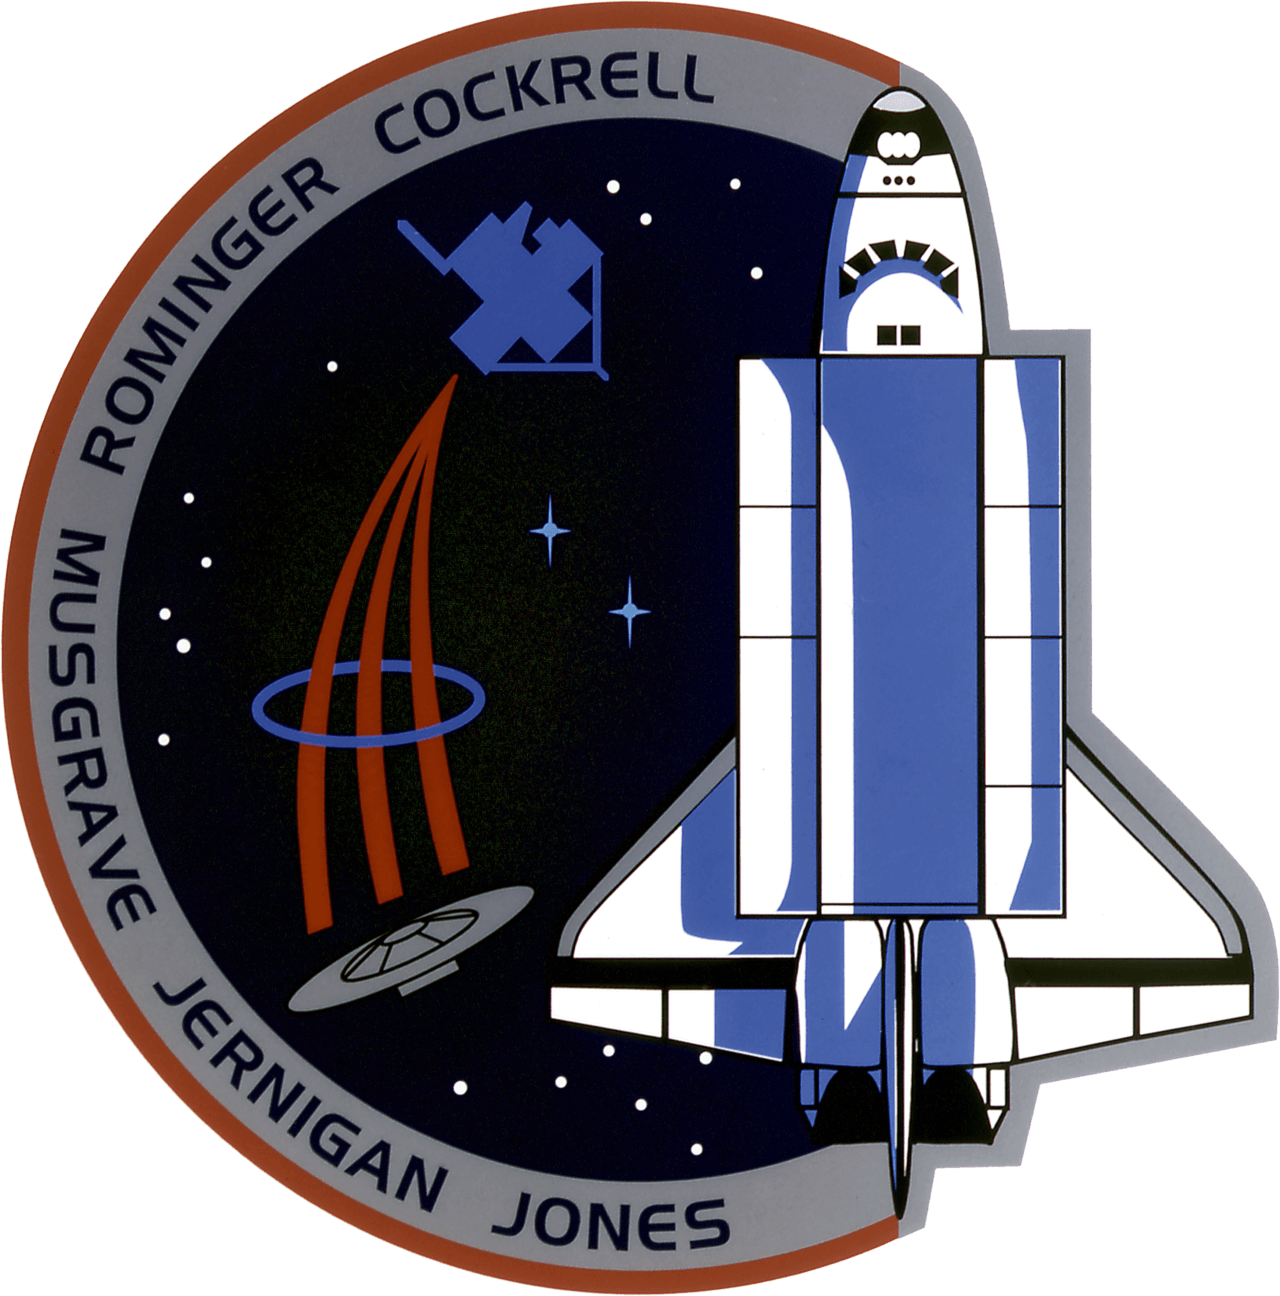 Mission patch for STS-80